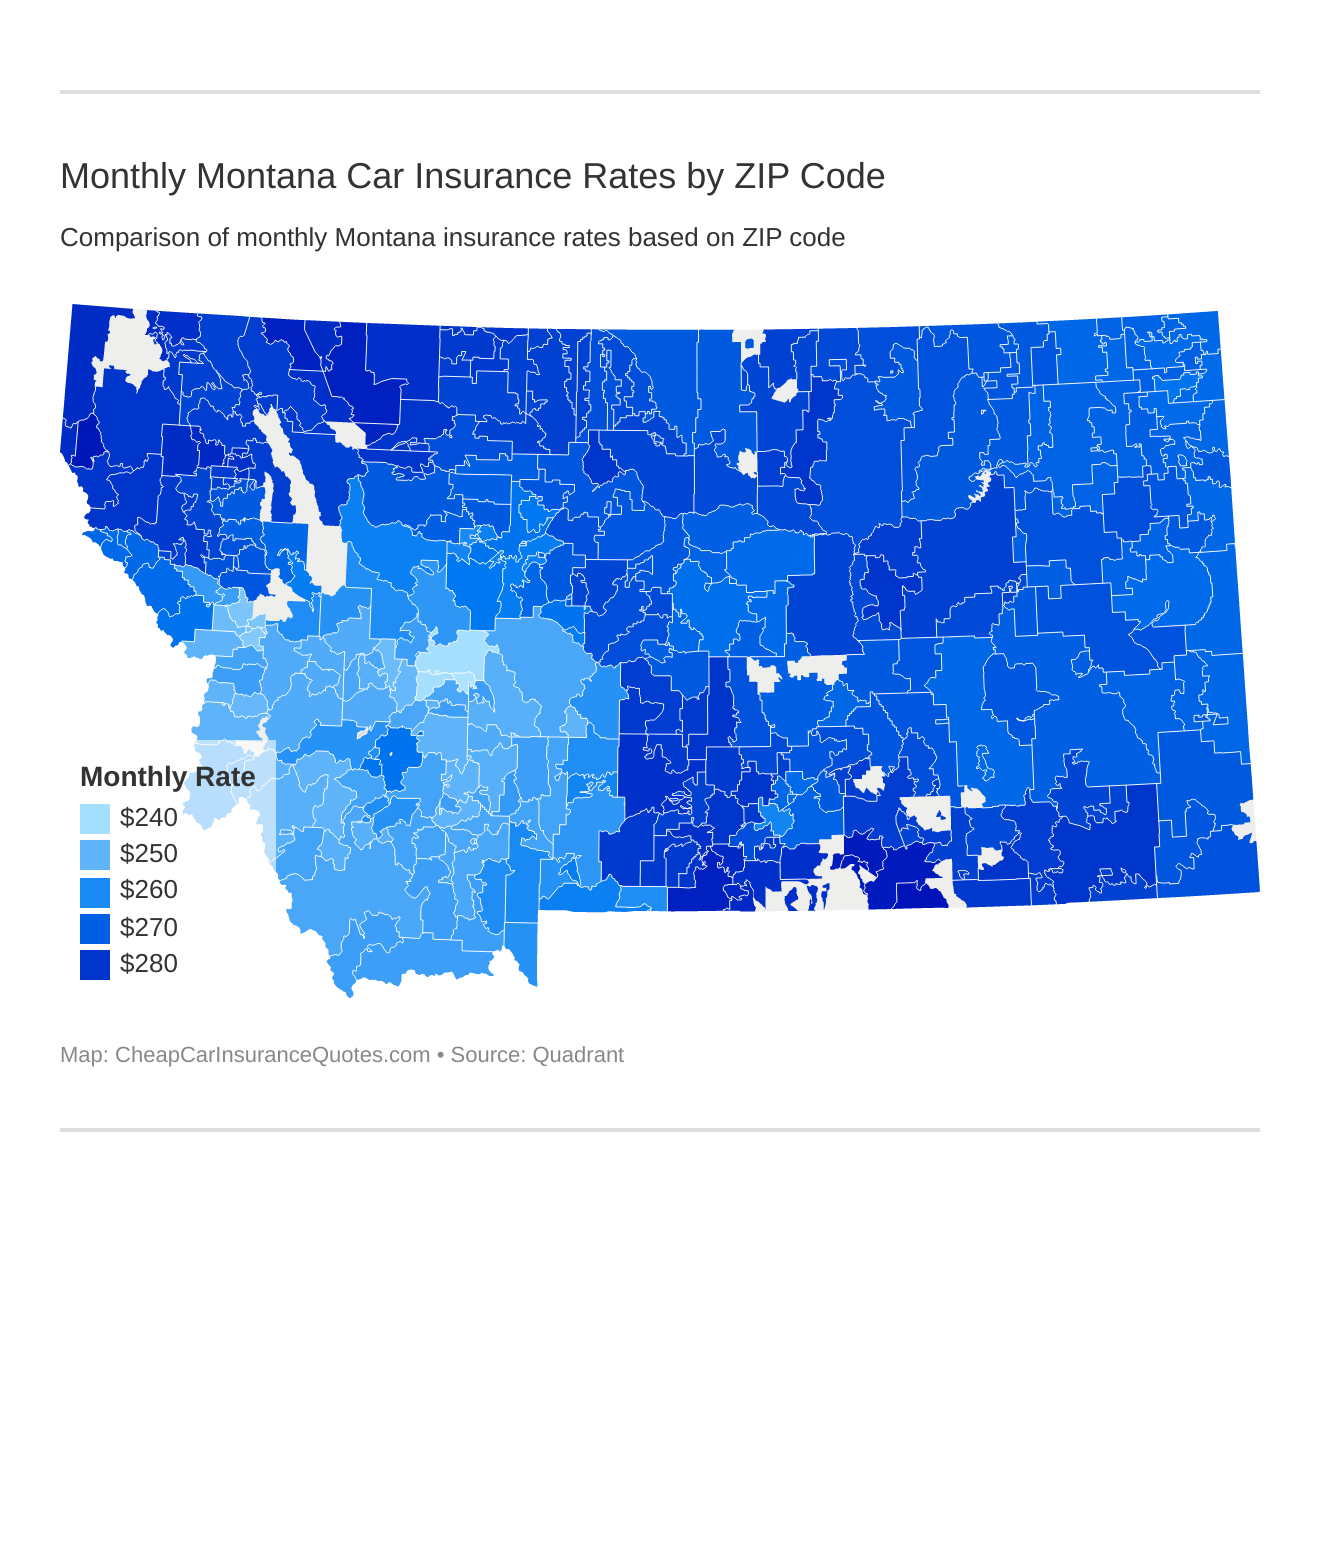 Monthly Montana Car Insurance Rates by ZIP Code